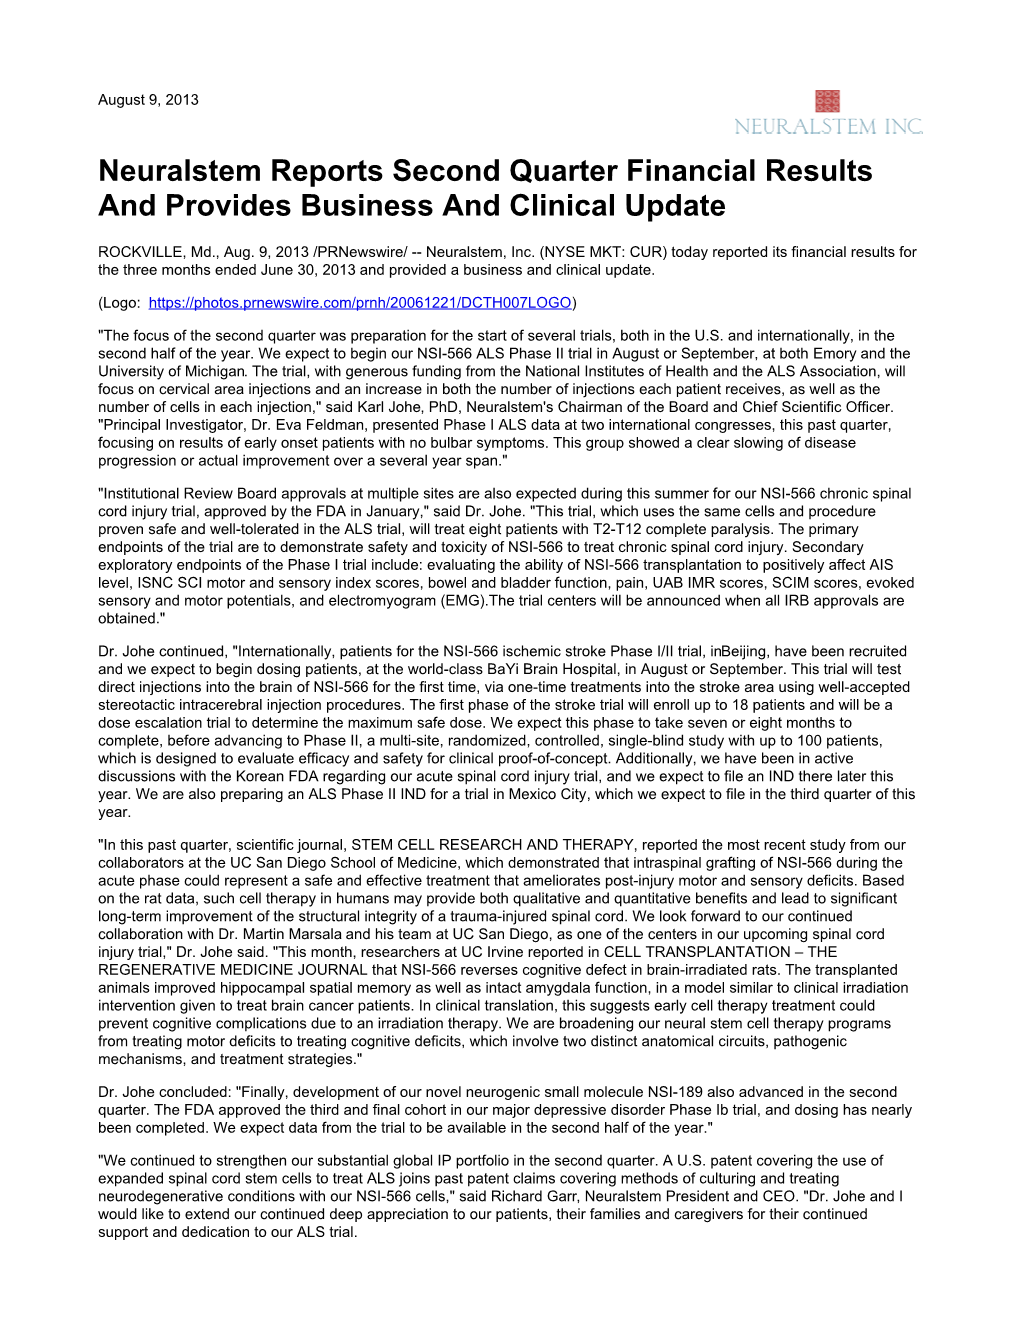 Neuralstem Reports Second Quarter Financial Results and Provides Business and Clinical Update